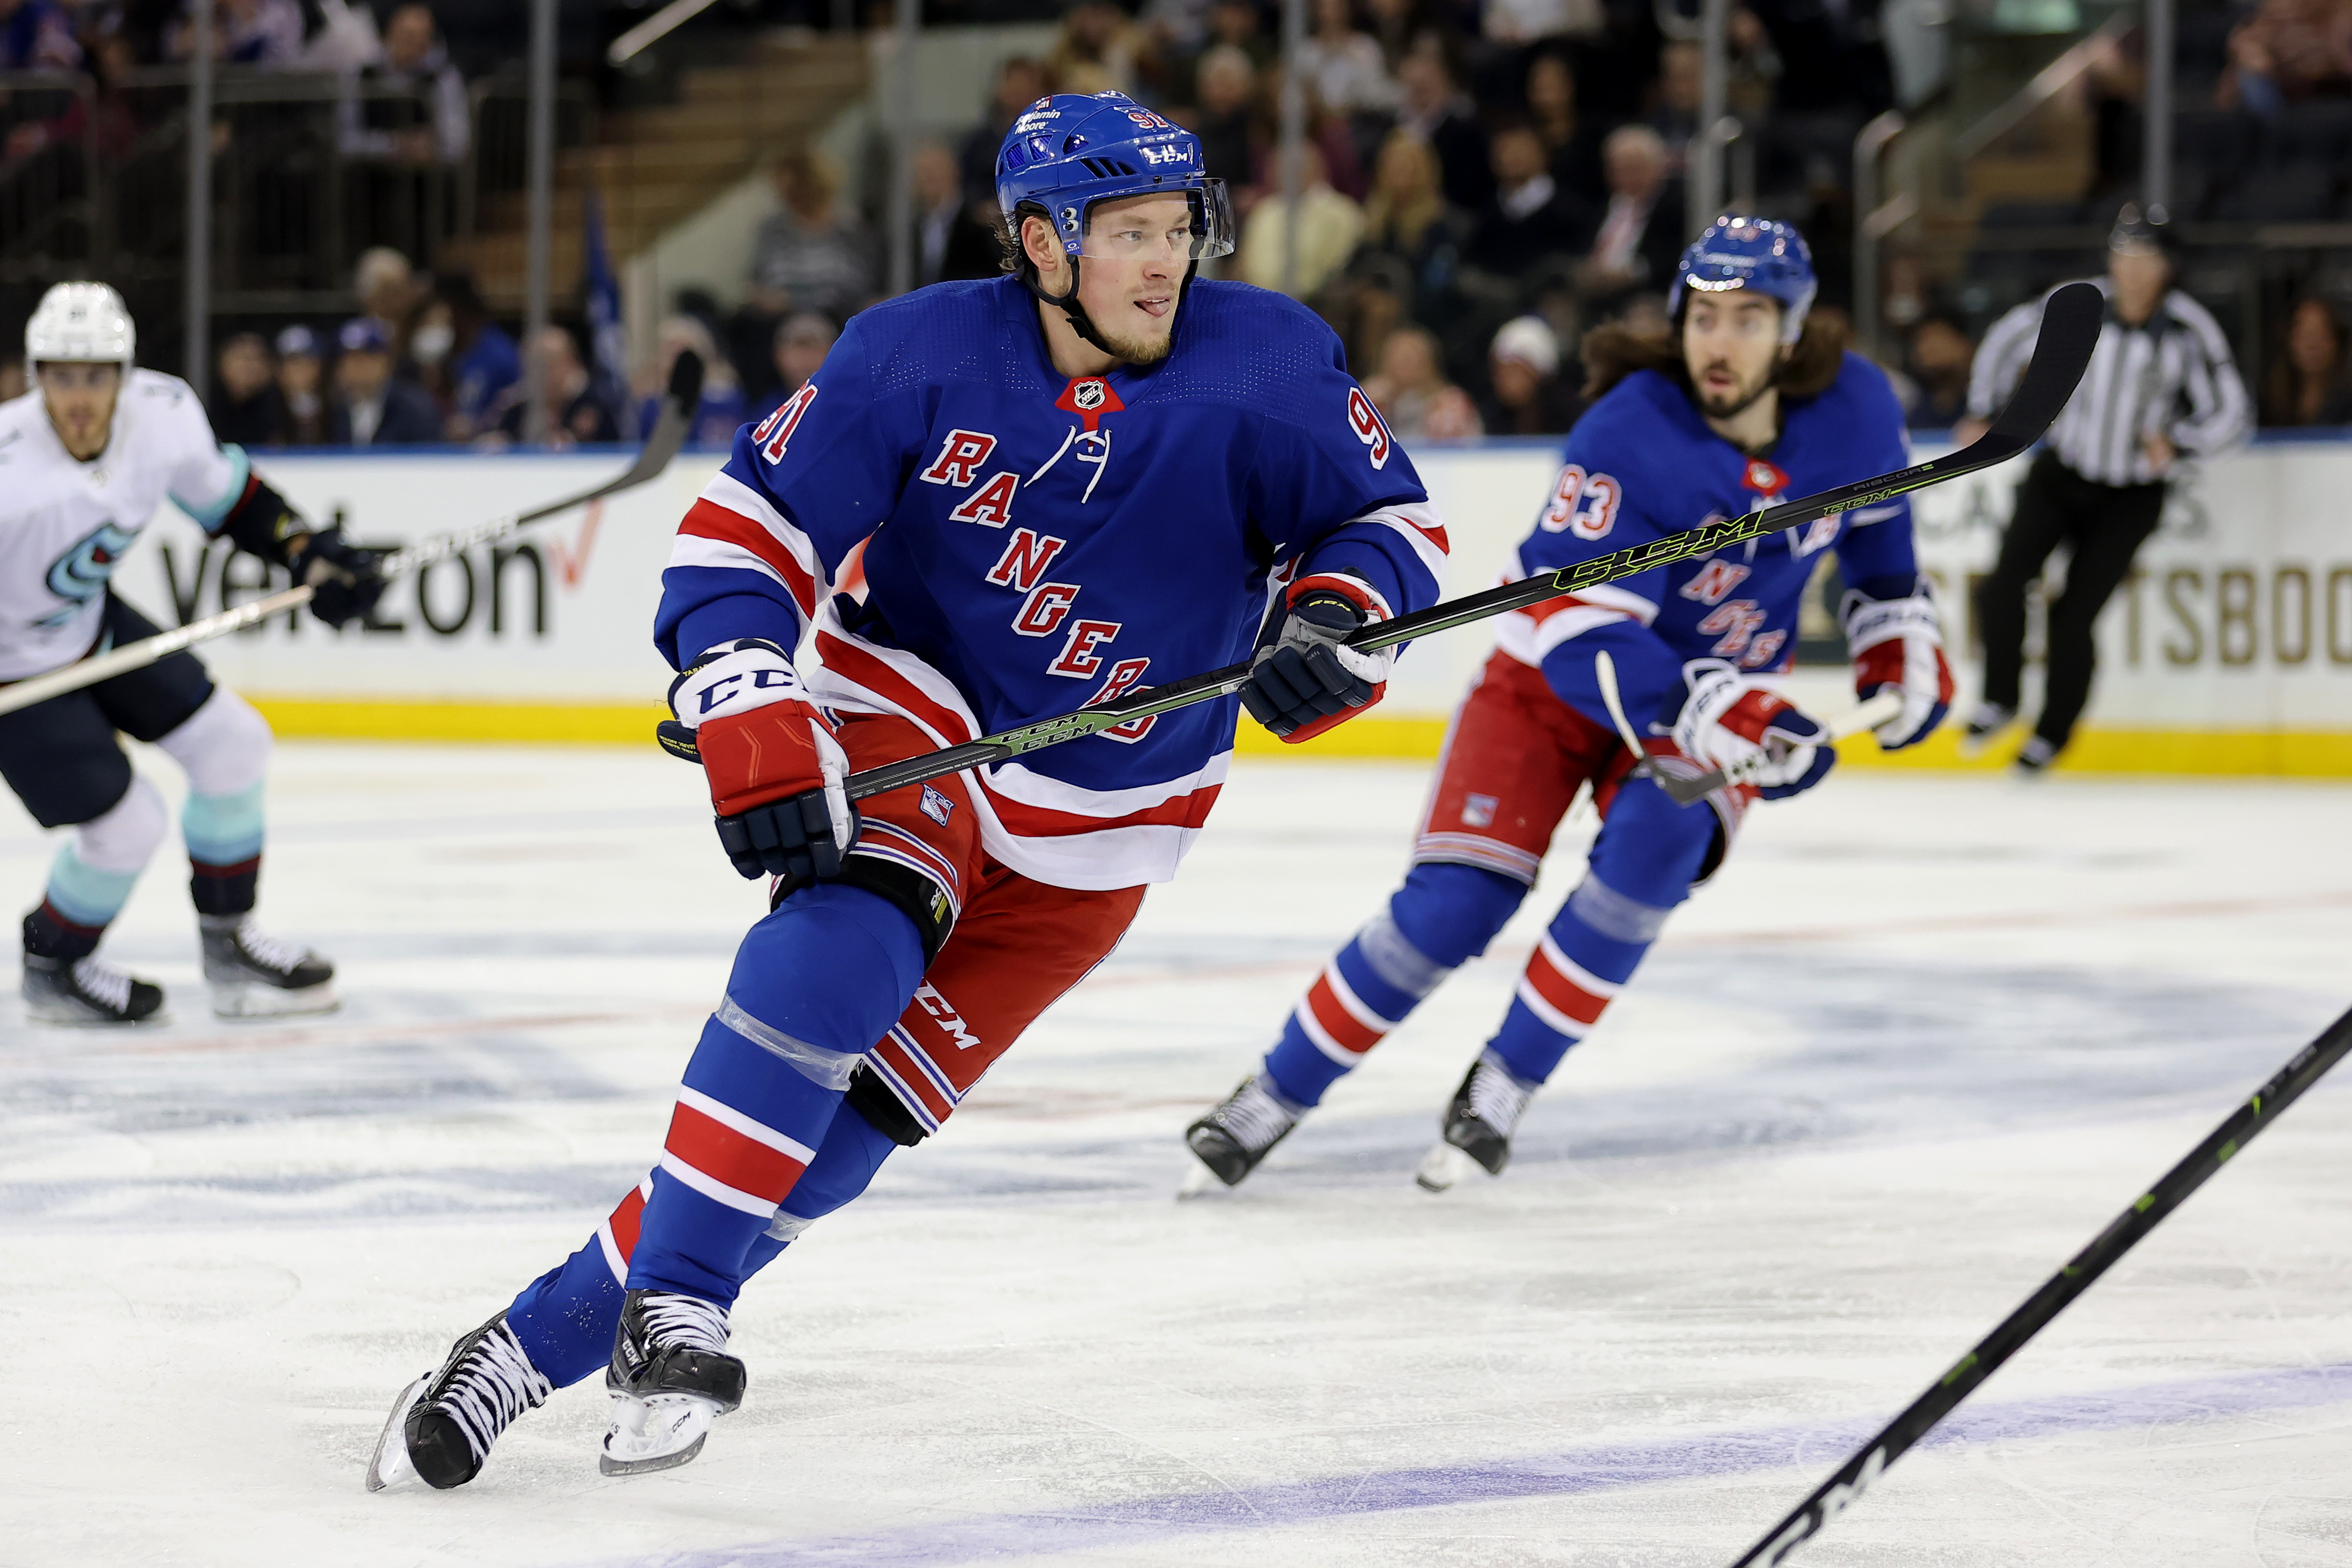 Panarin gets three points as Rangers snap three-game skid vs. Penguins